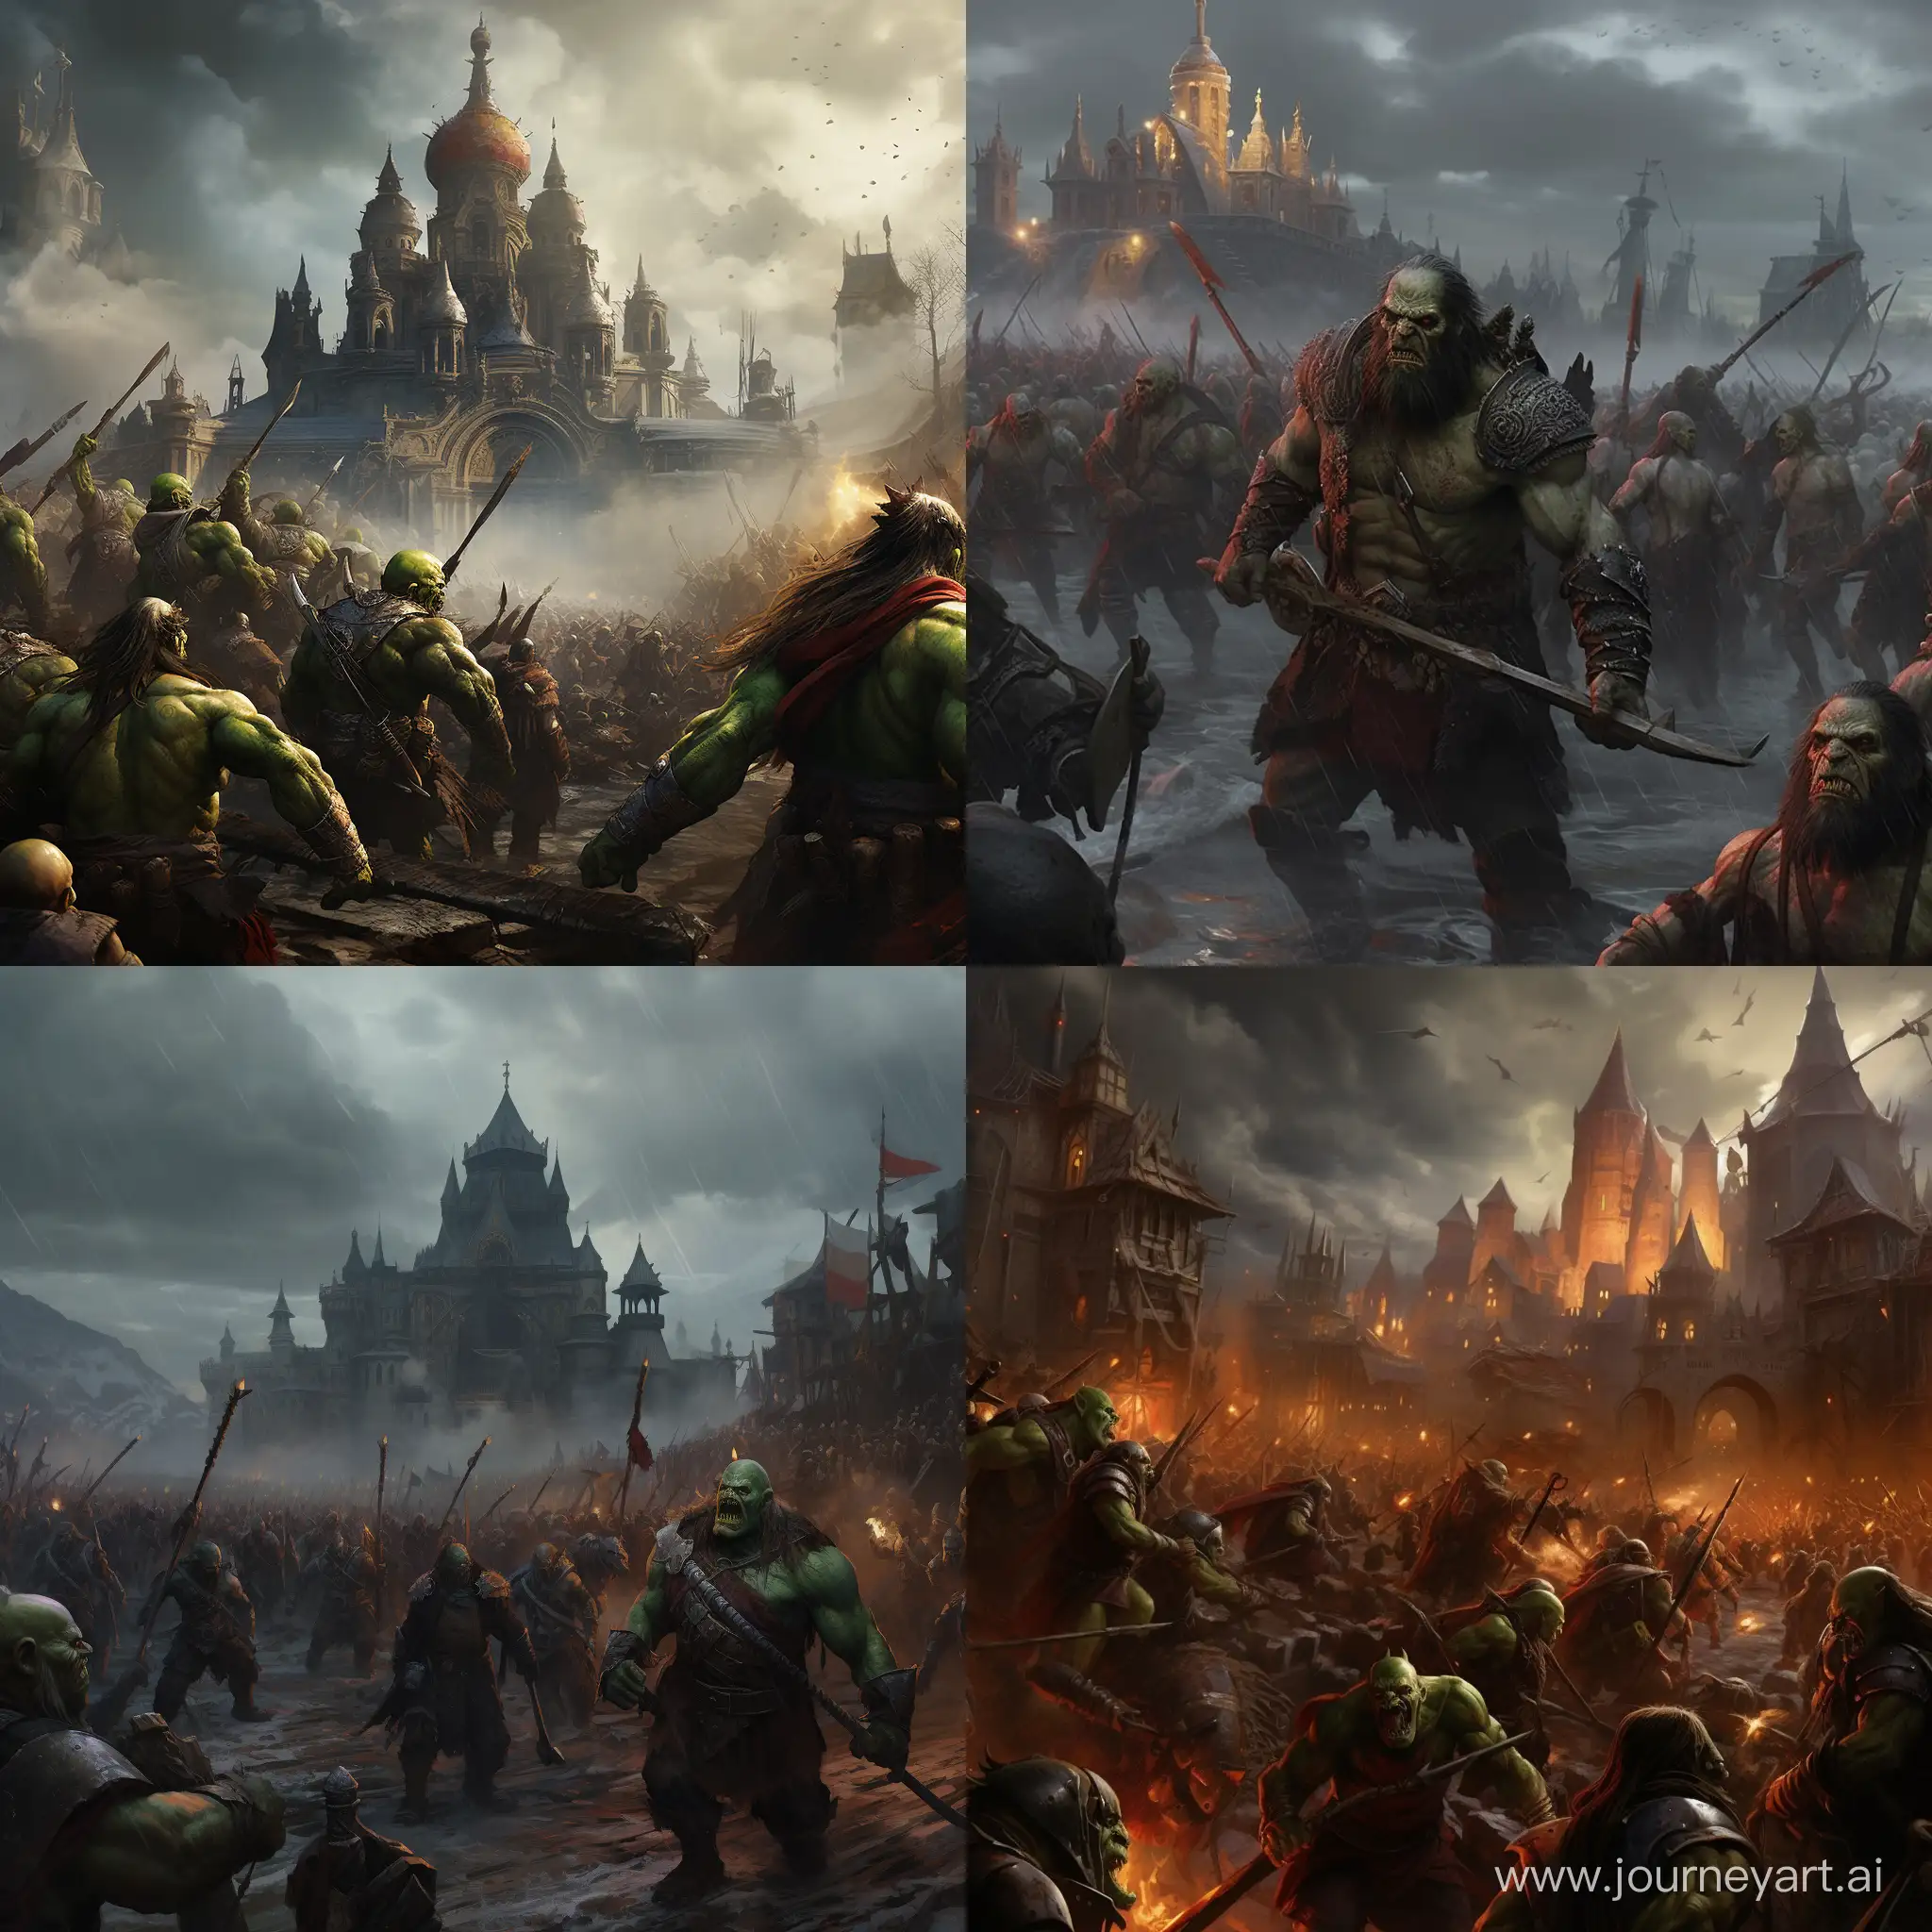 Victorious-Russian-Orcs-Conquer-Kiev-in-Epic-Battle